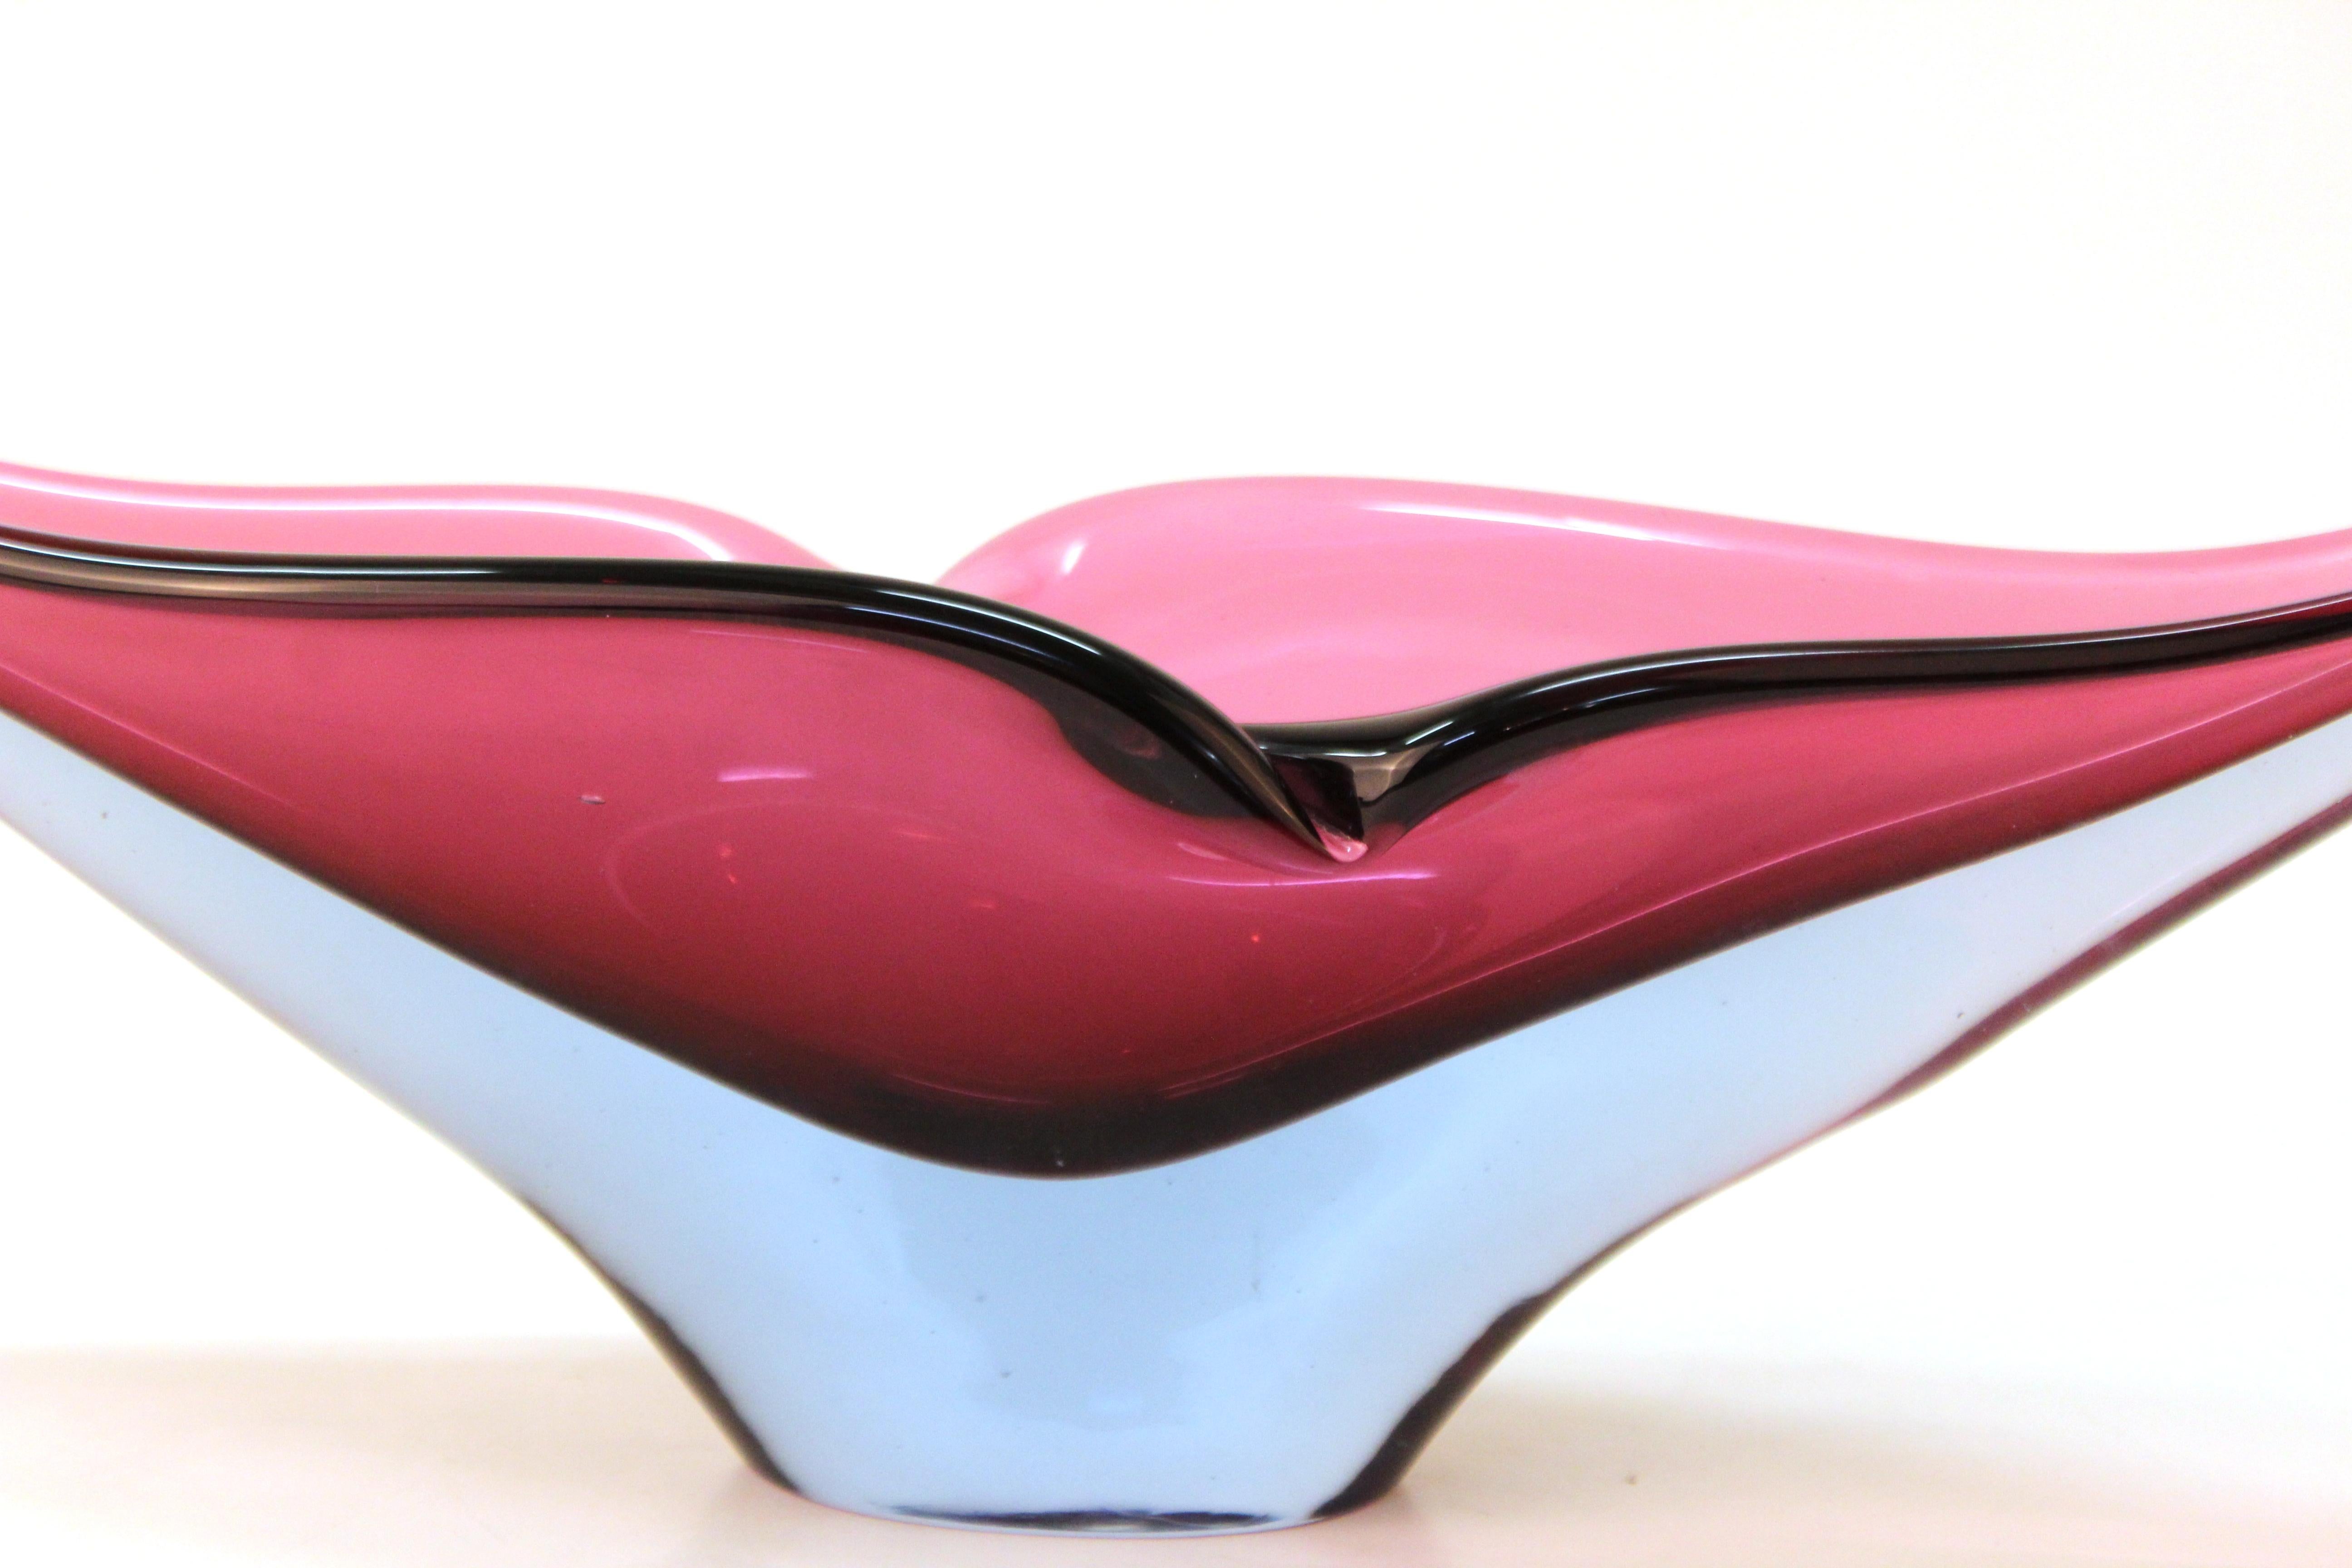 Mid-Century Modern sculptural art glass bowl in eggplant purple encased in clear glass. The shape of this decorative bowl is reminiscent of a bird taking flight. Some minor contact scratches on the bottom, but in overall great vintage condition.